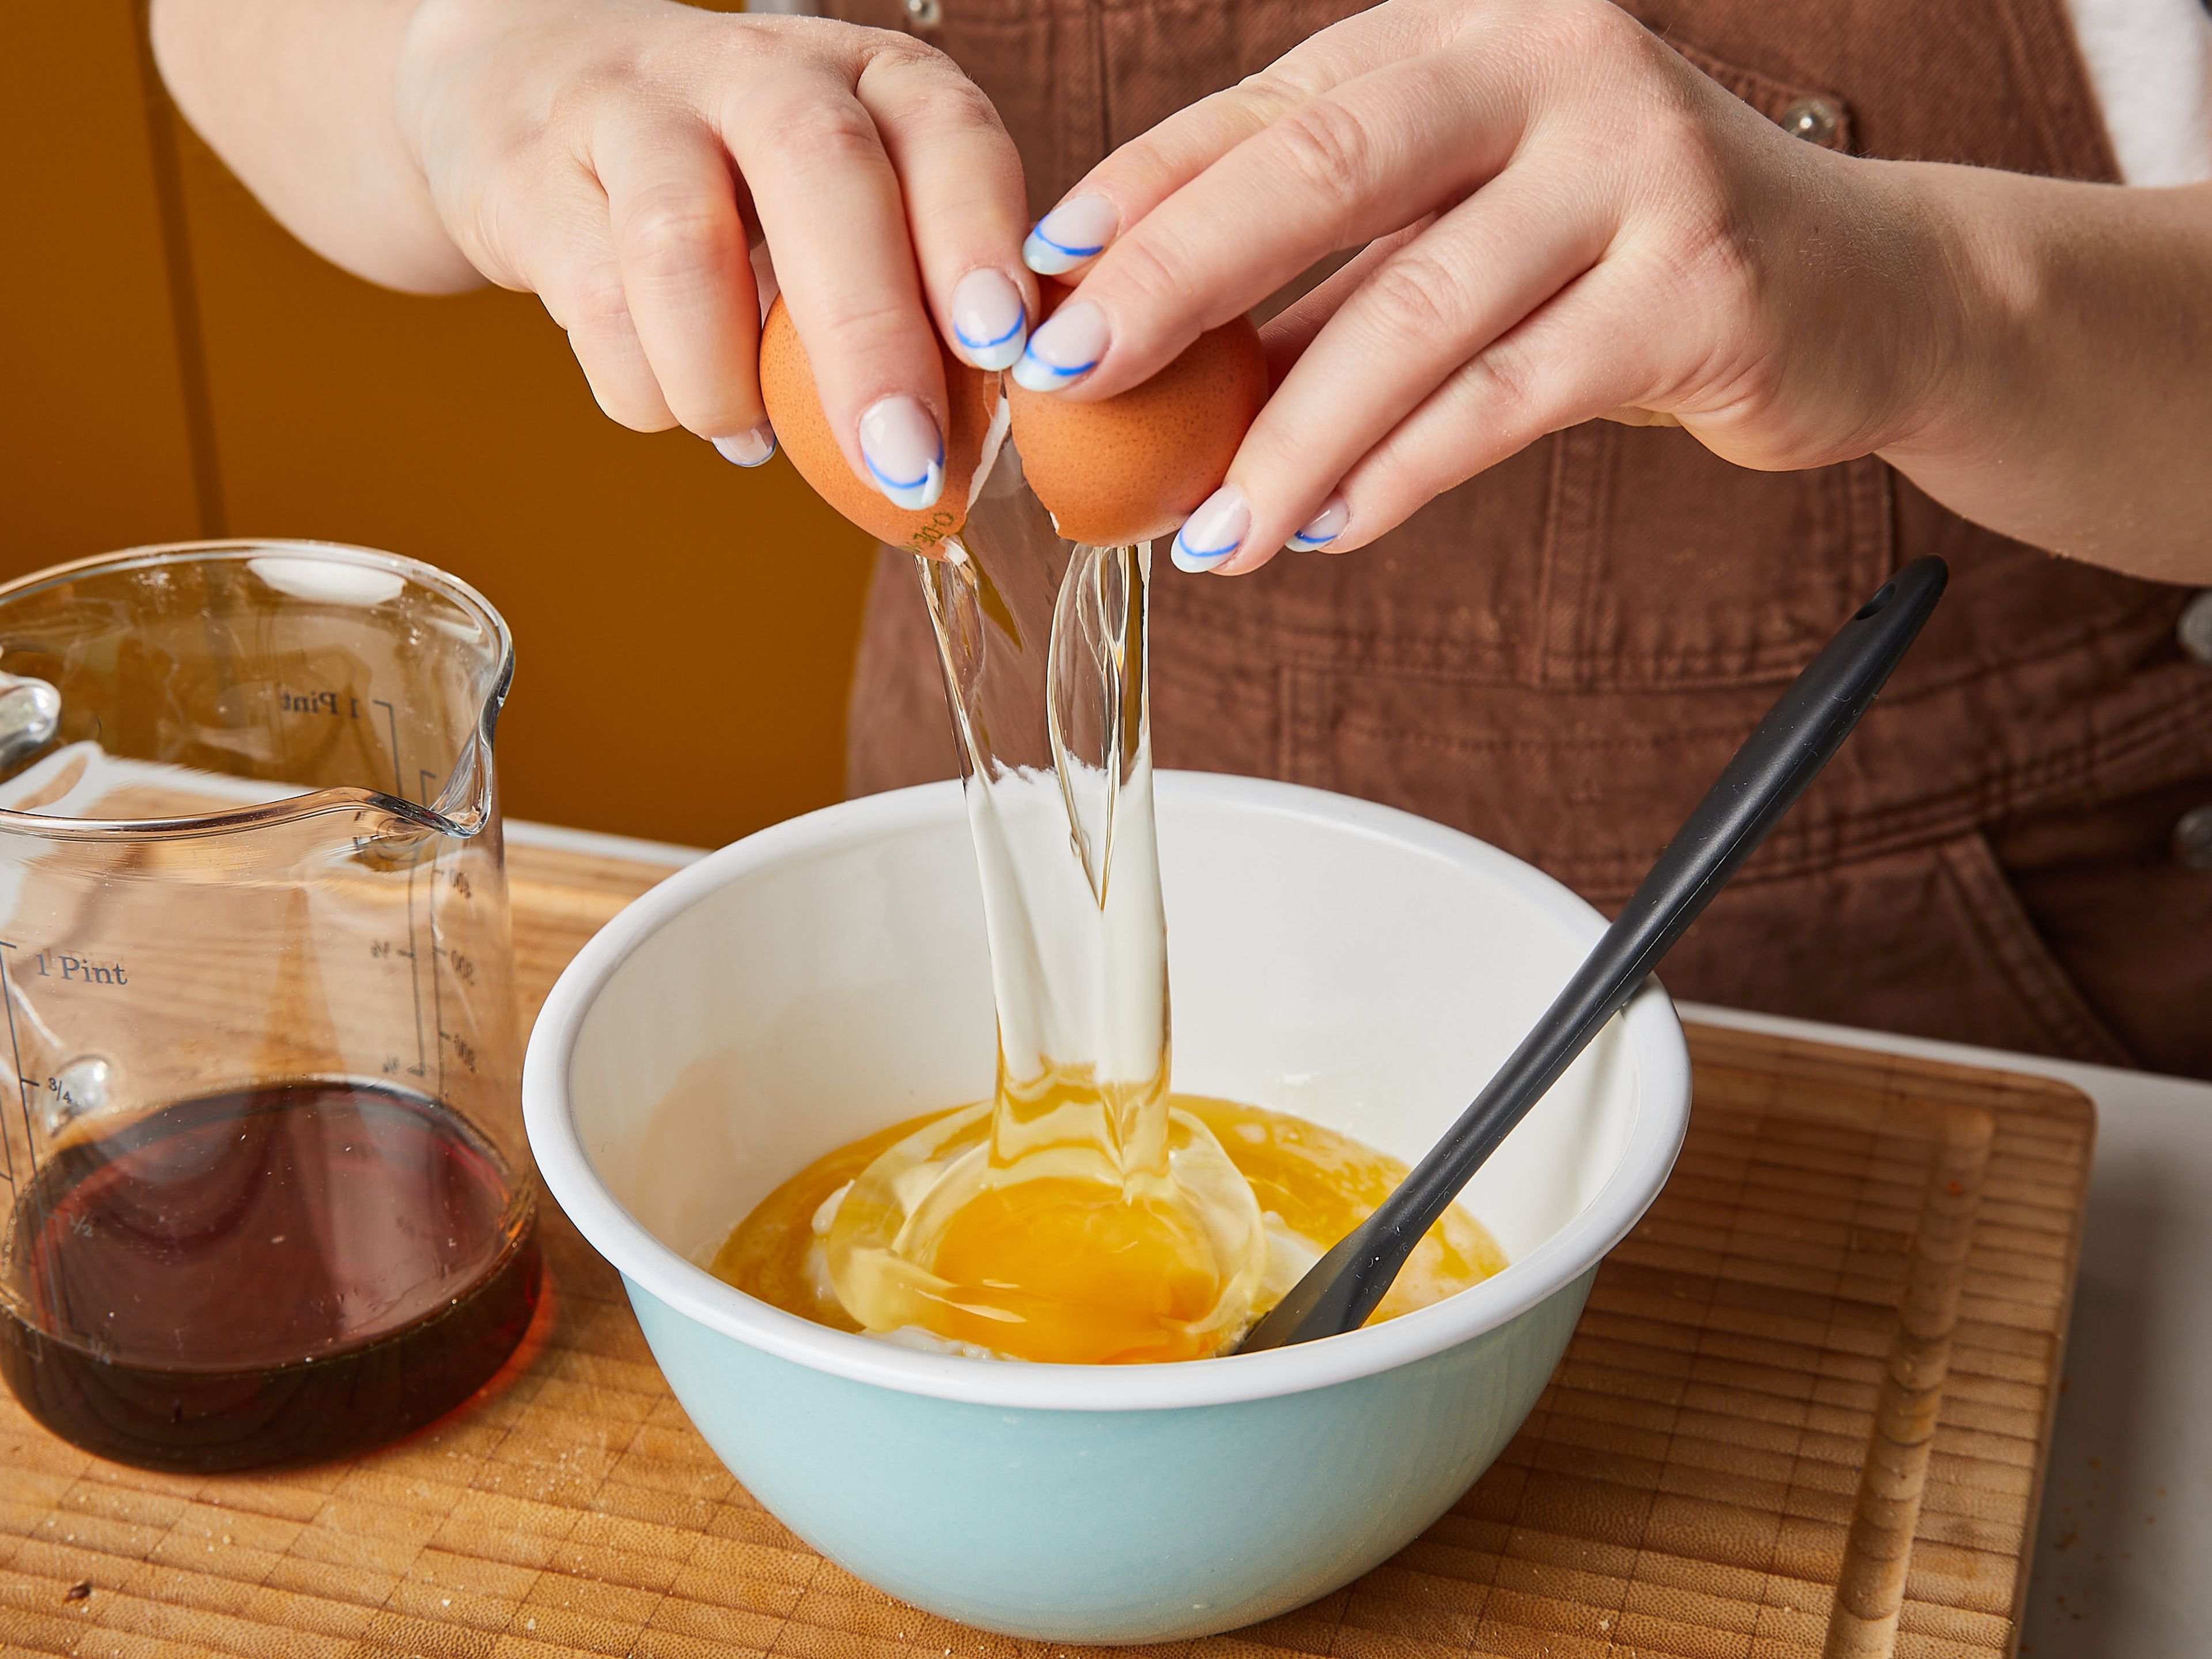 In a small pot set over medium-high heat (or in a heatproof bowl in a microwave), melt butter. In a bowl, whisk together greek yogurt, maple syrup, slightly cooled melted butter, and eggs. Set aside.